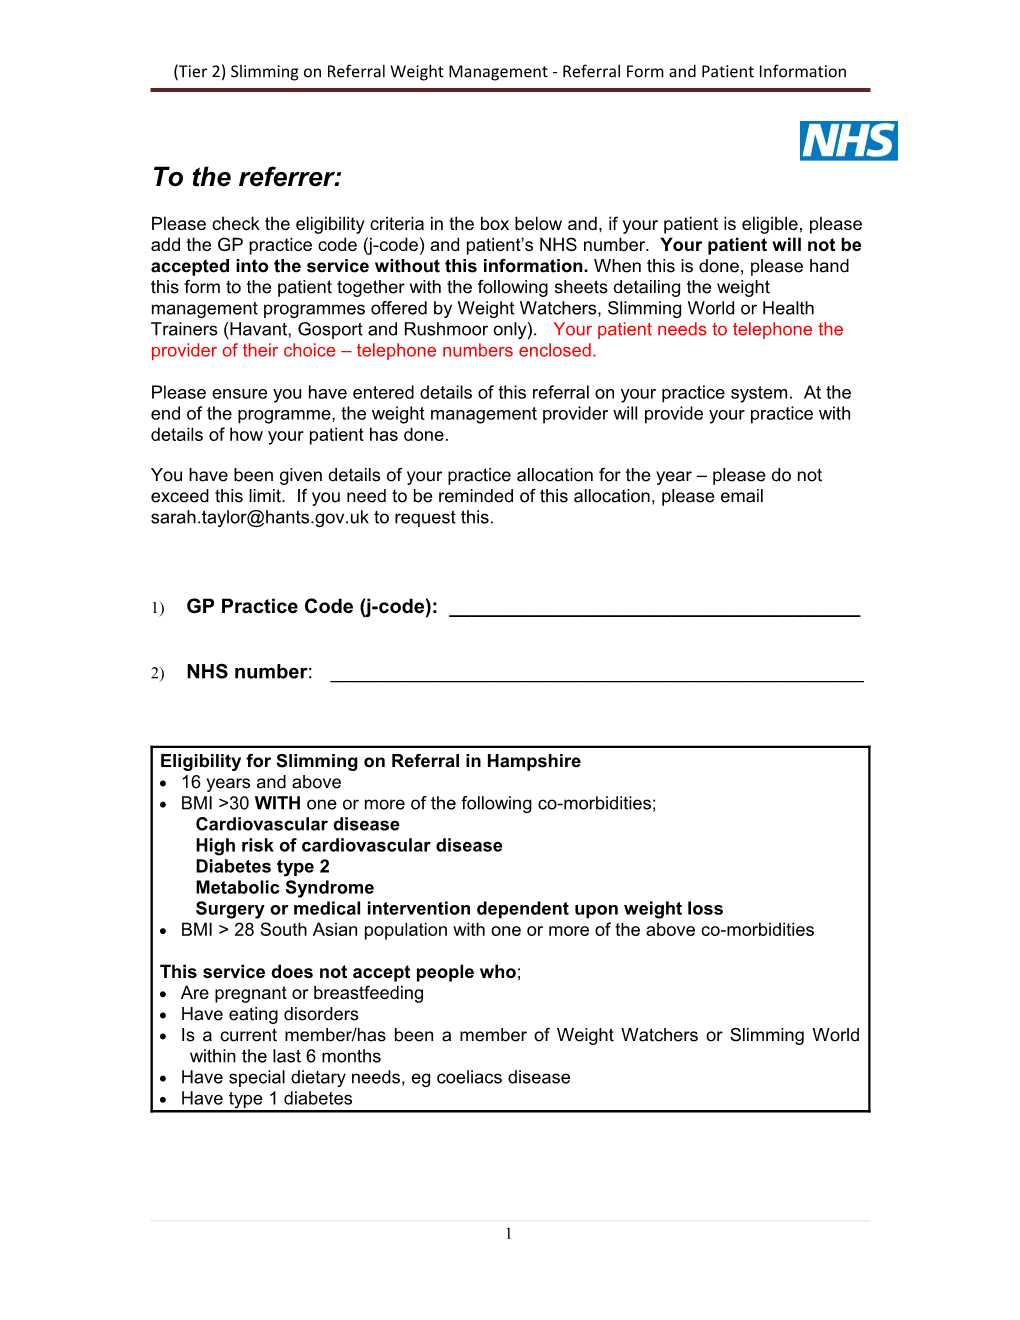 (Tier 2) Slimming on Referral Weight Management - Referral Form and Patient Information